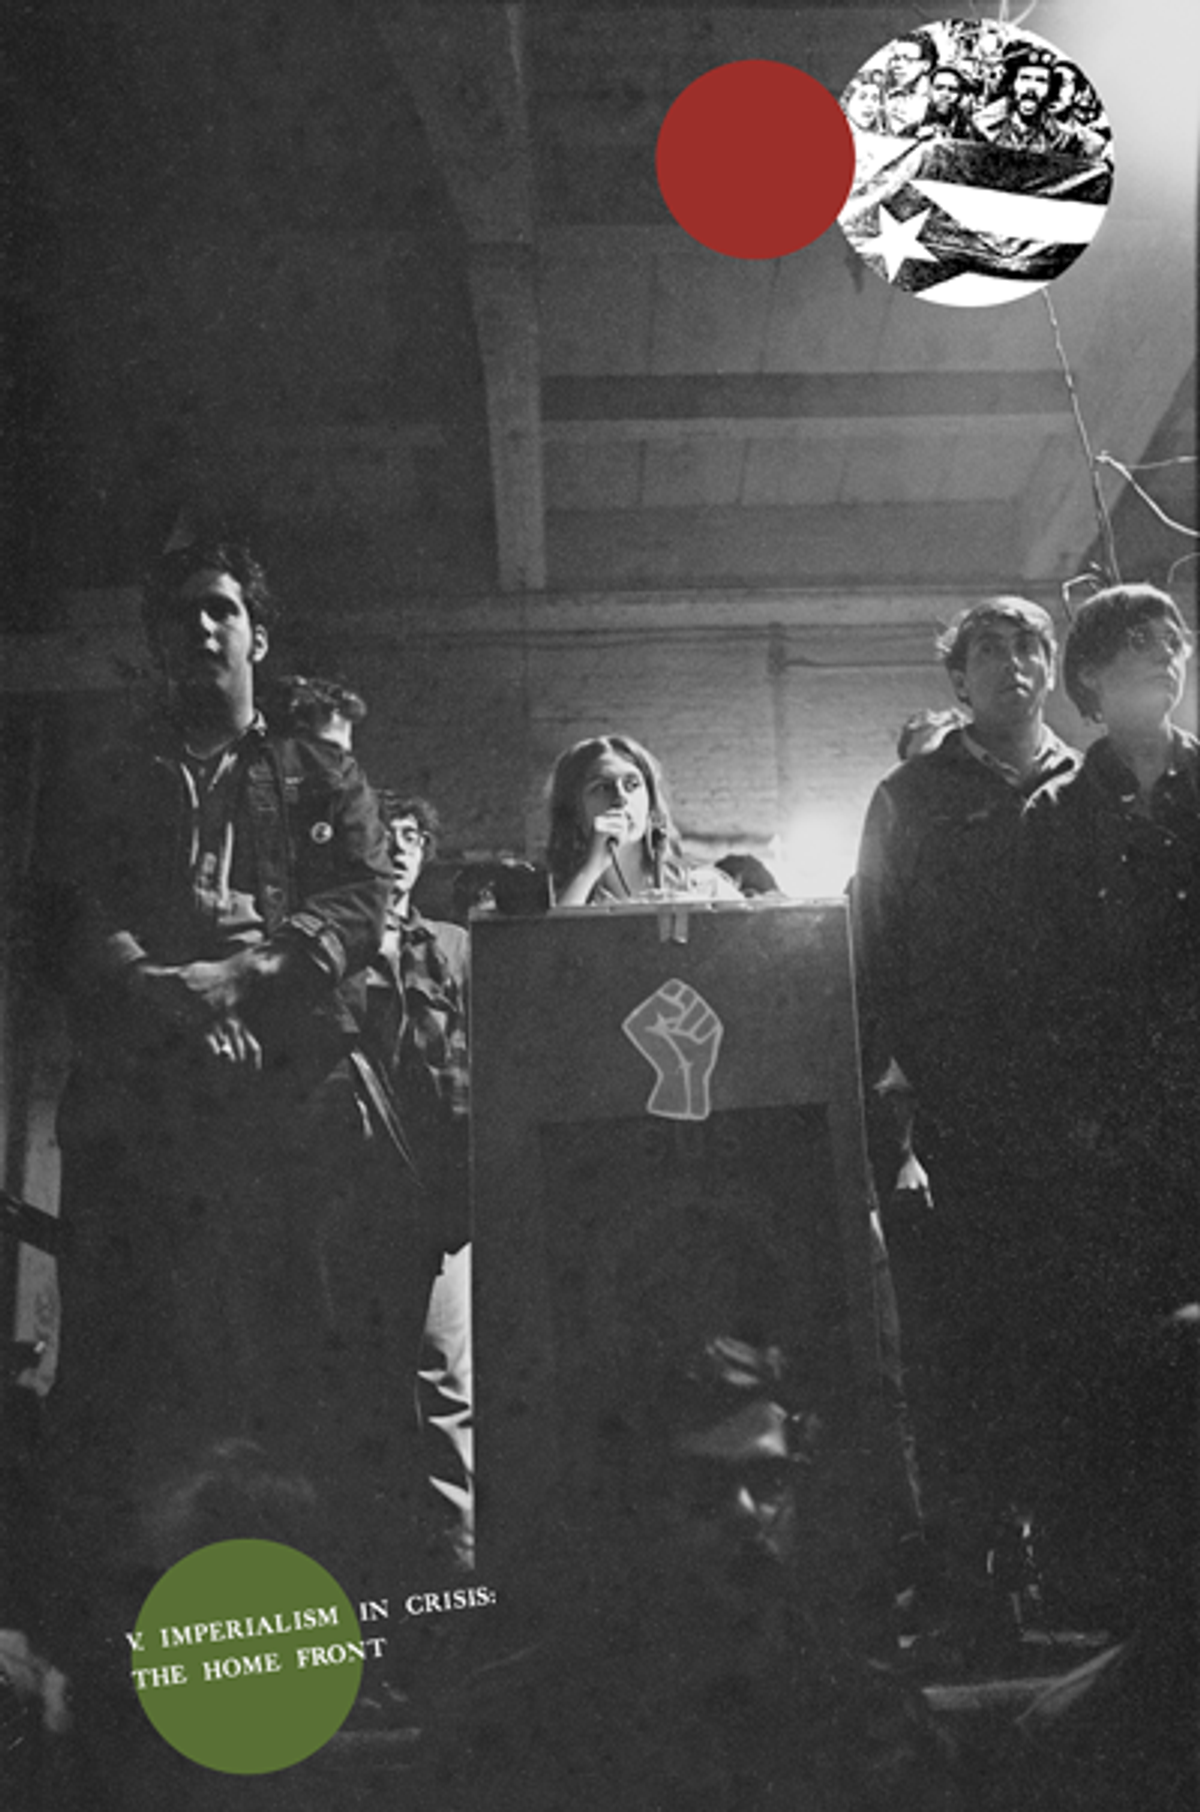 Bernardine Dohrn, a leader of the Weather Underground, speaks from a podium following the splintering of the Students for a Democratic Society (SDS) organization, Chicago, late June 1969. Fellow activists Mark Rudd and Susan Stern stand to her left.